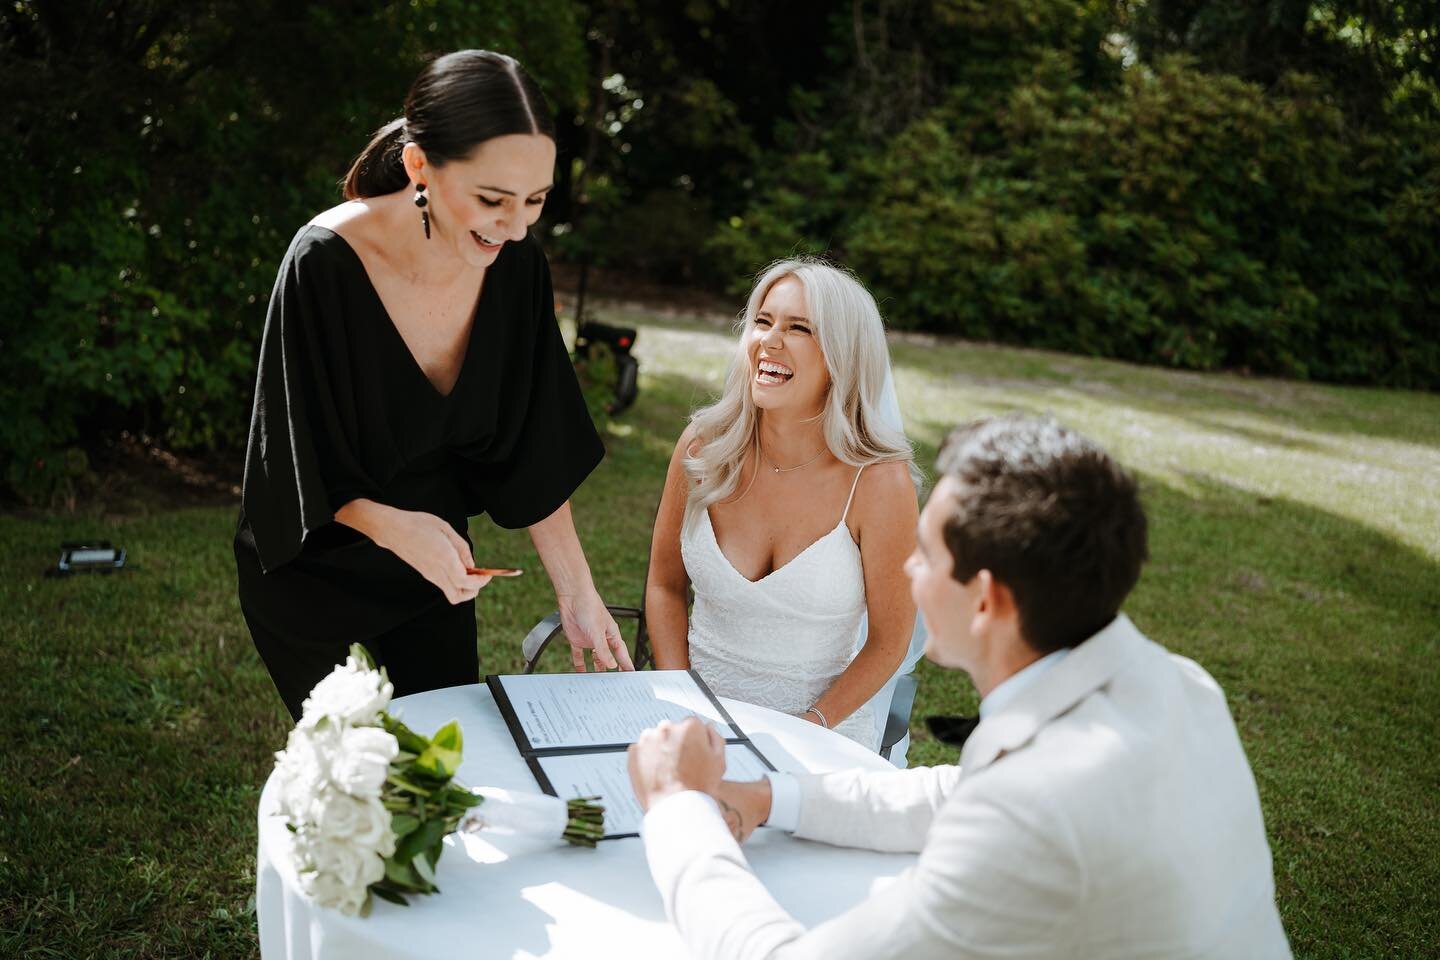 Who said signing paperwork had to be boring?!

This is actually one of my favourite parts of the ceremony. In most cases it&rsquo;s after the couple have nailed their vows, shared their first kiss and they&rsquo;re getting amped up for their big fina